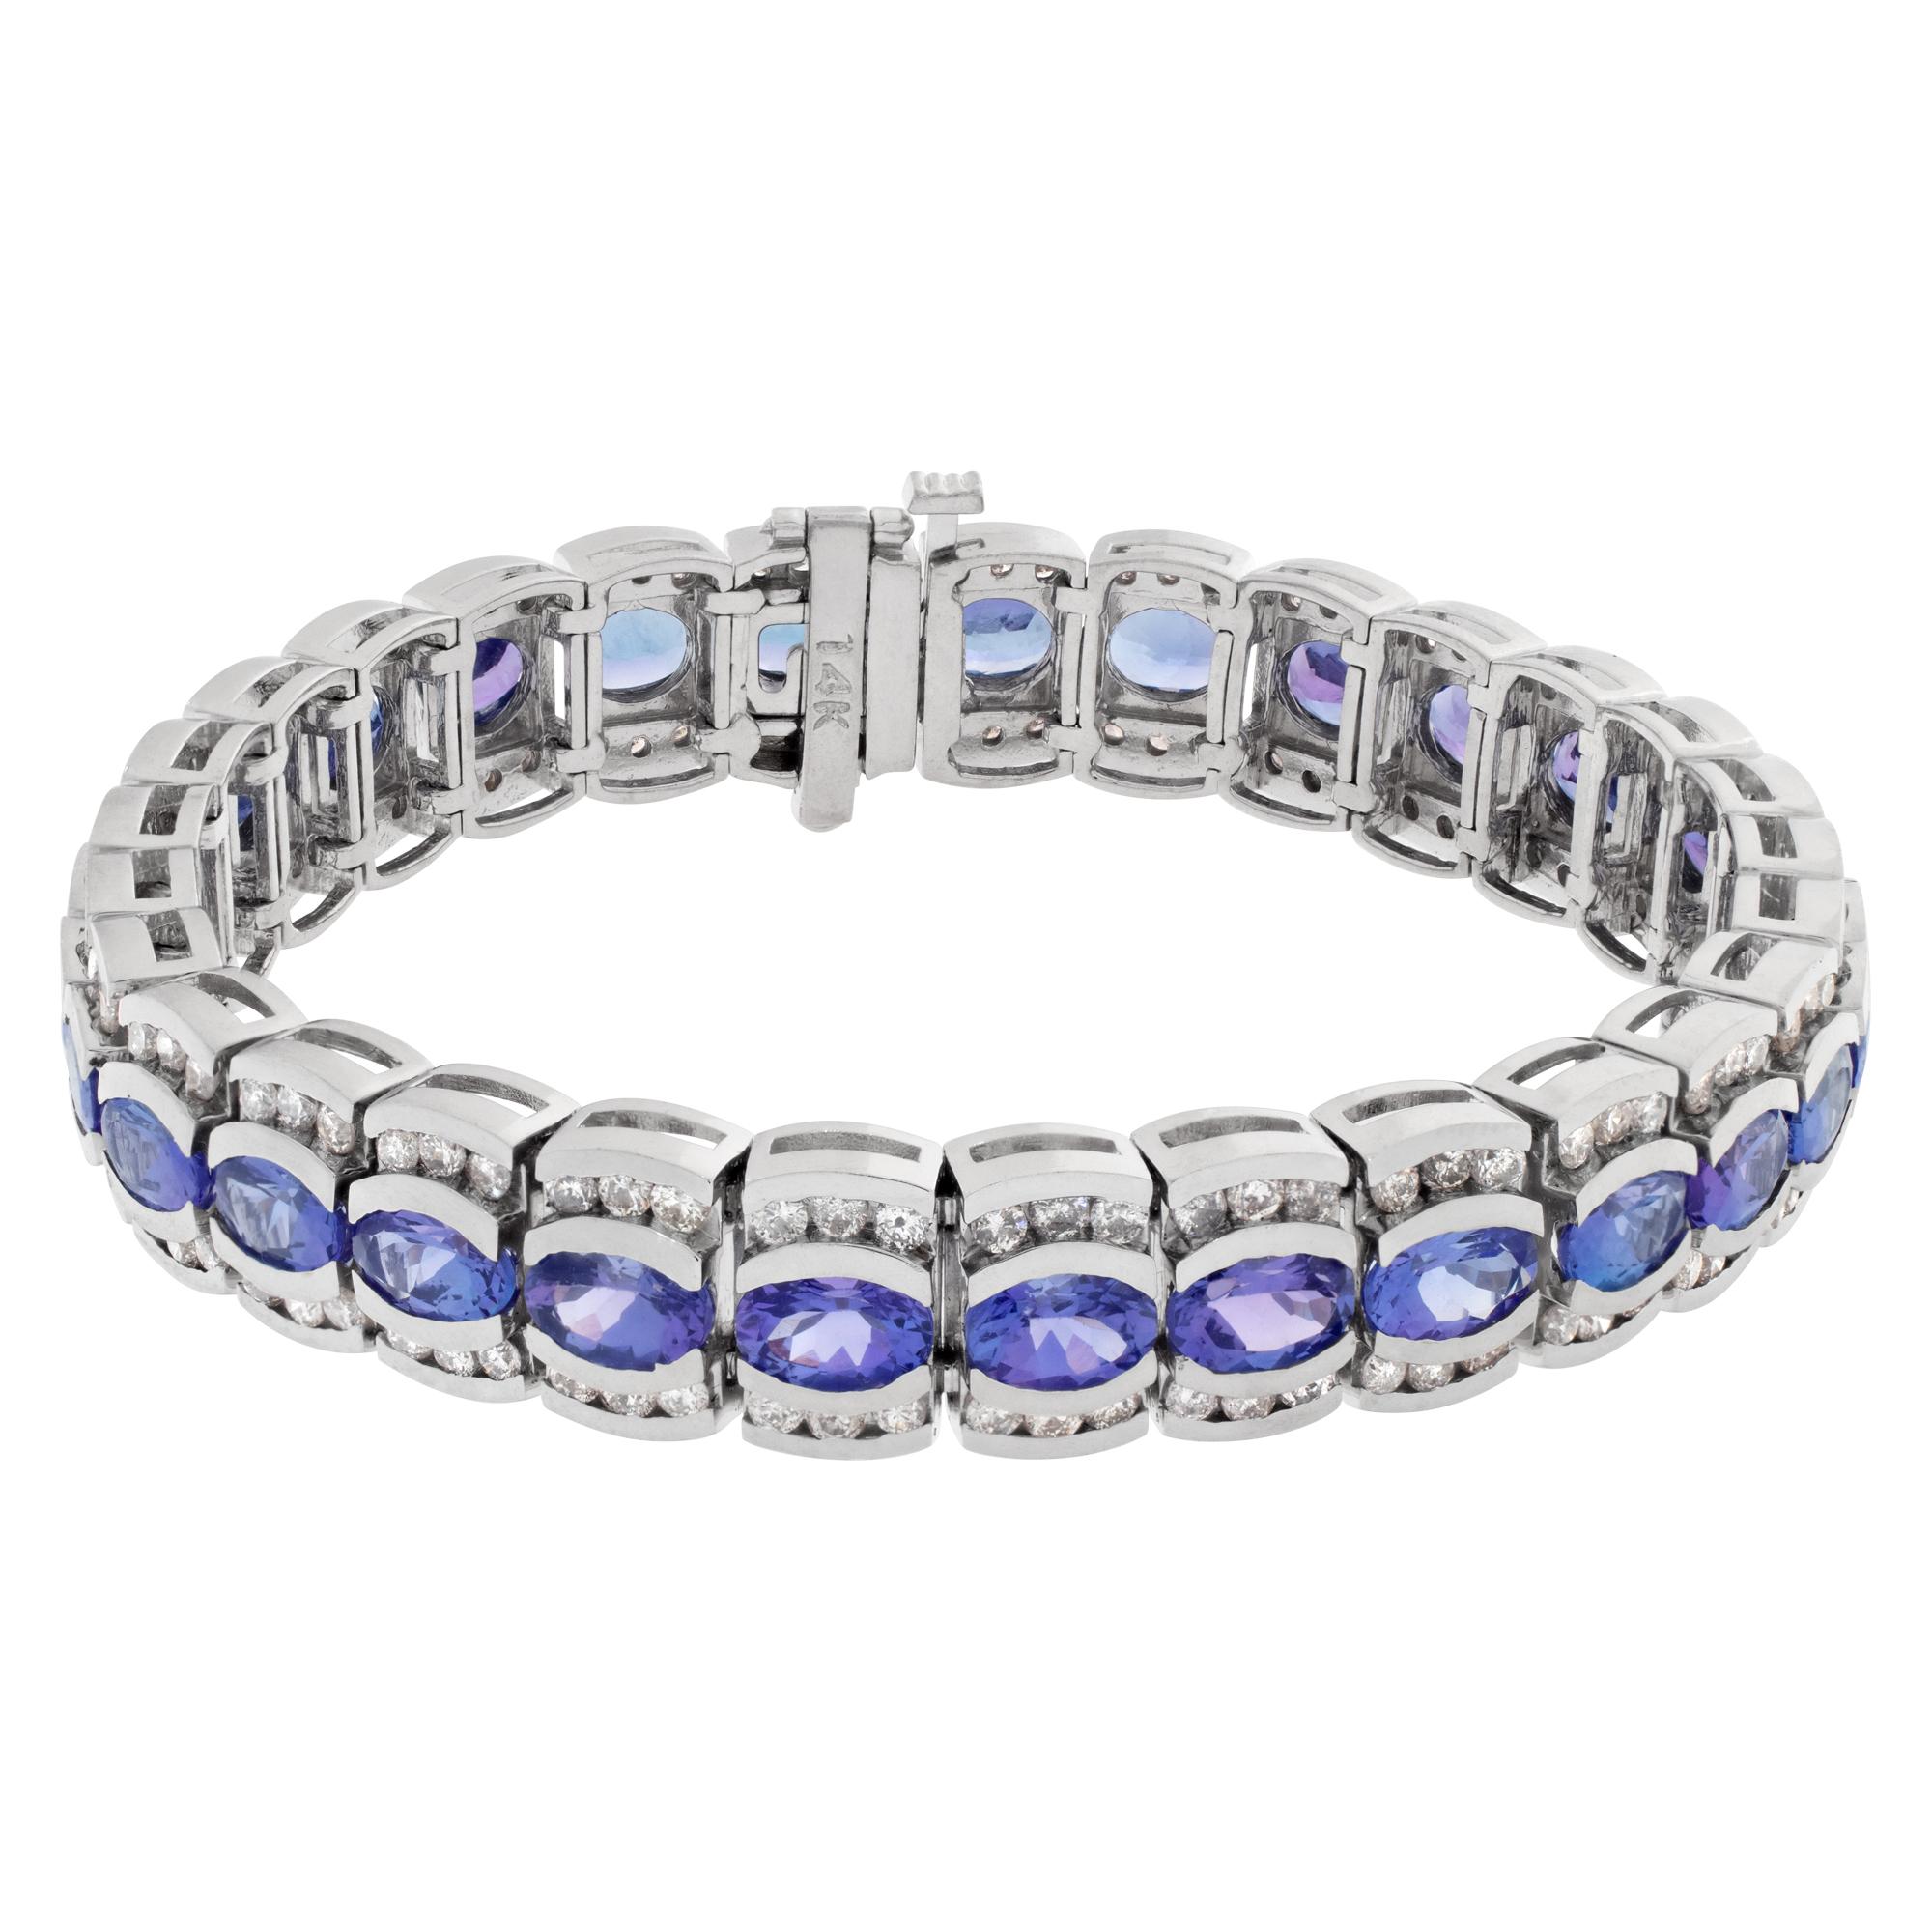 Gorgeous and classic diamond and tanzanite line bracelet in 14k white gold with 3.95 cts in G-H color, VS-SI clarity round diamonds and 13.75 cts in oval tanzanites.
7 inch length.
10mm width.